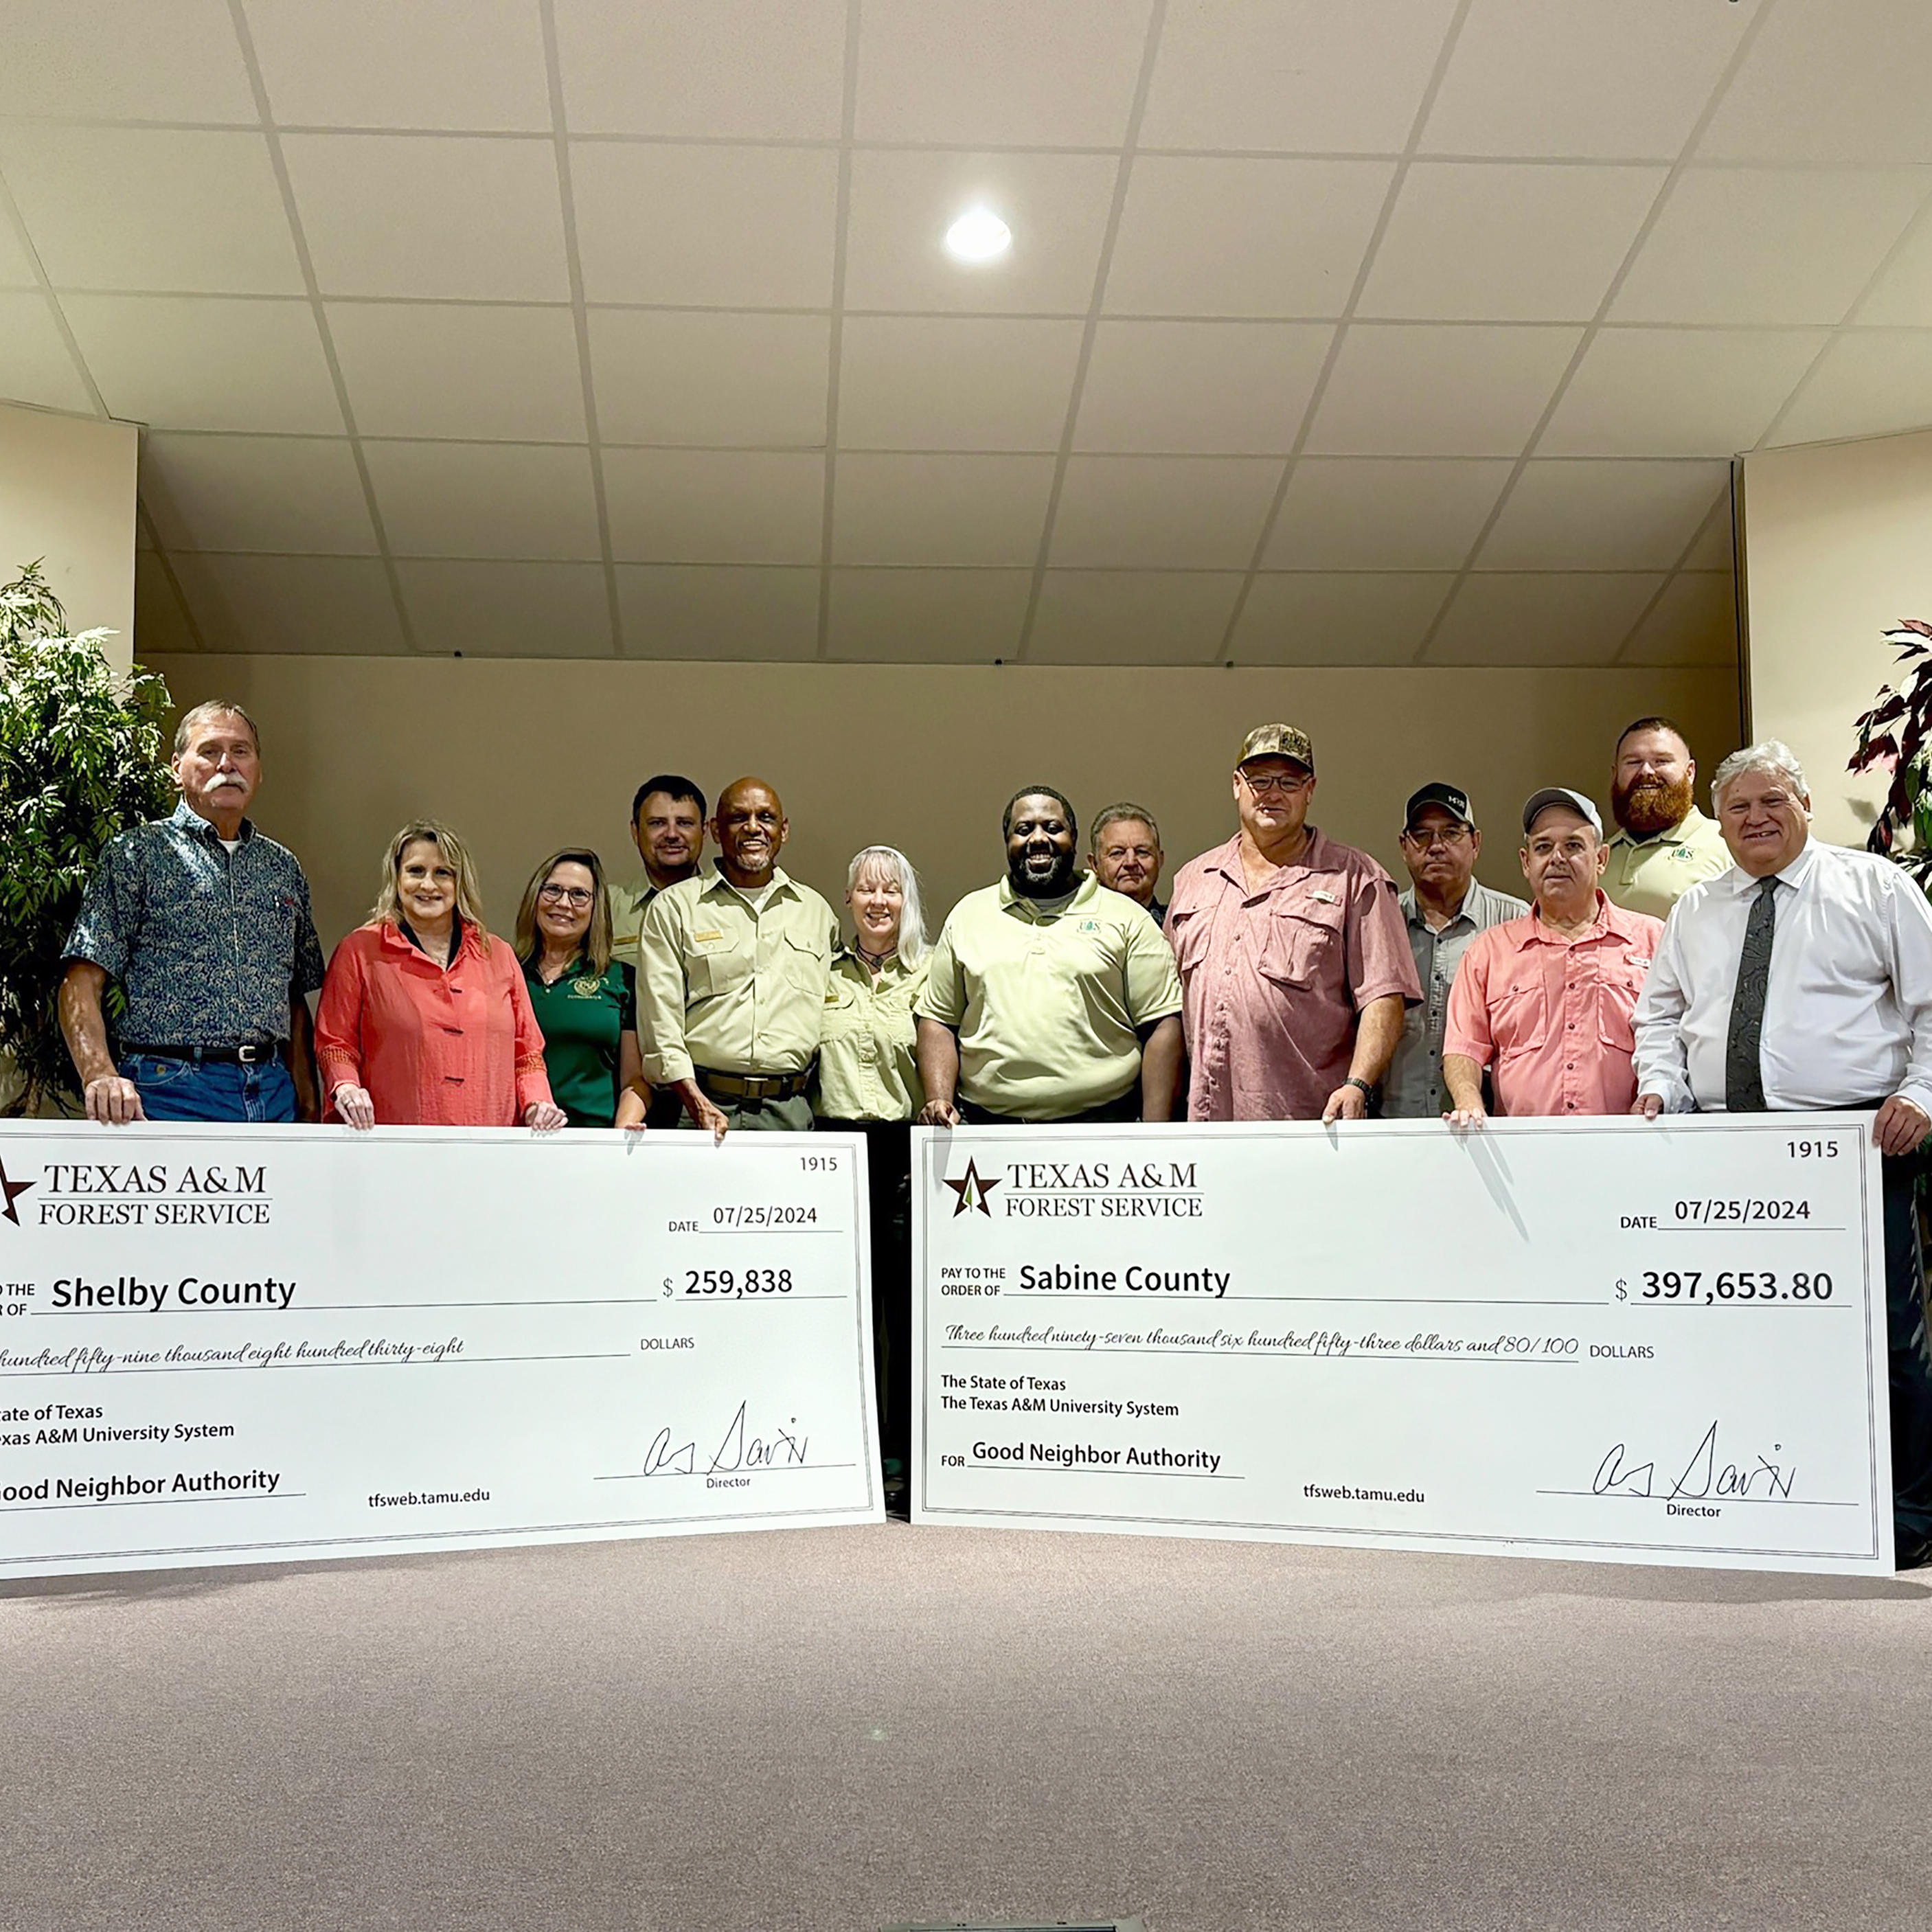 Sabine and Shelby counties received $657,492 for county road improvement projects from timber sale profits through the Good Neighbor Authority partnership between USDA Forest Service and Texas A&M Forest Service.